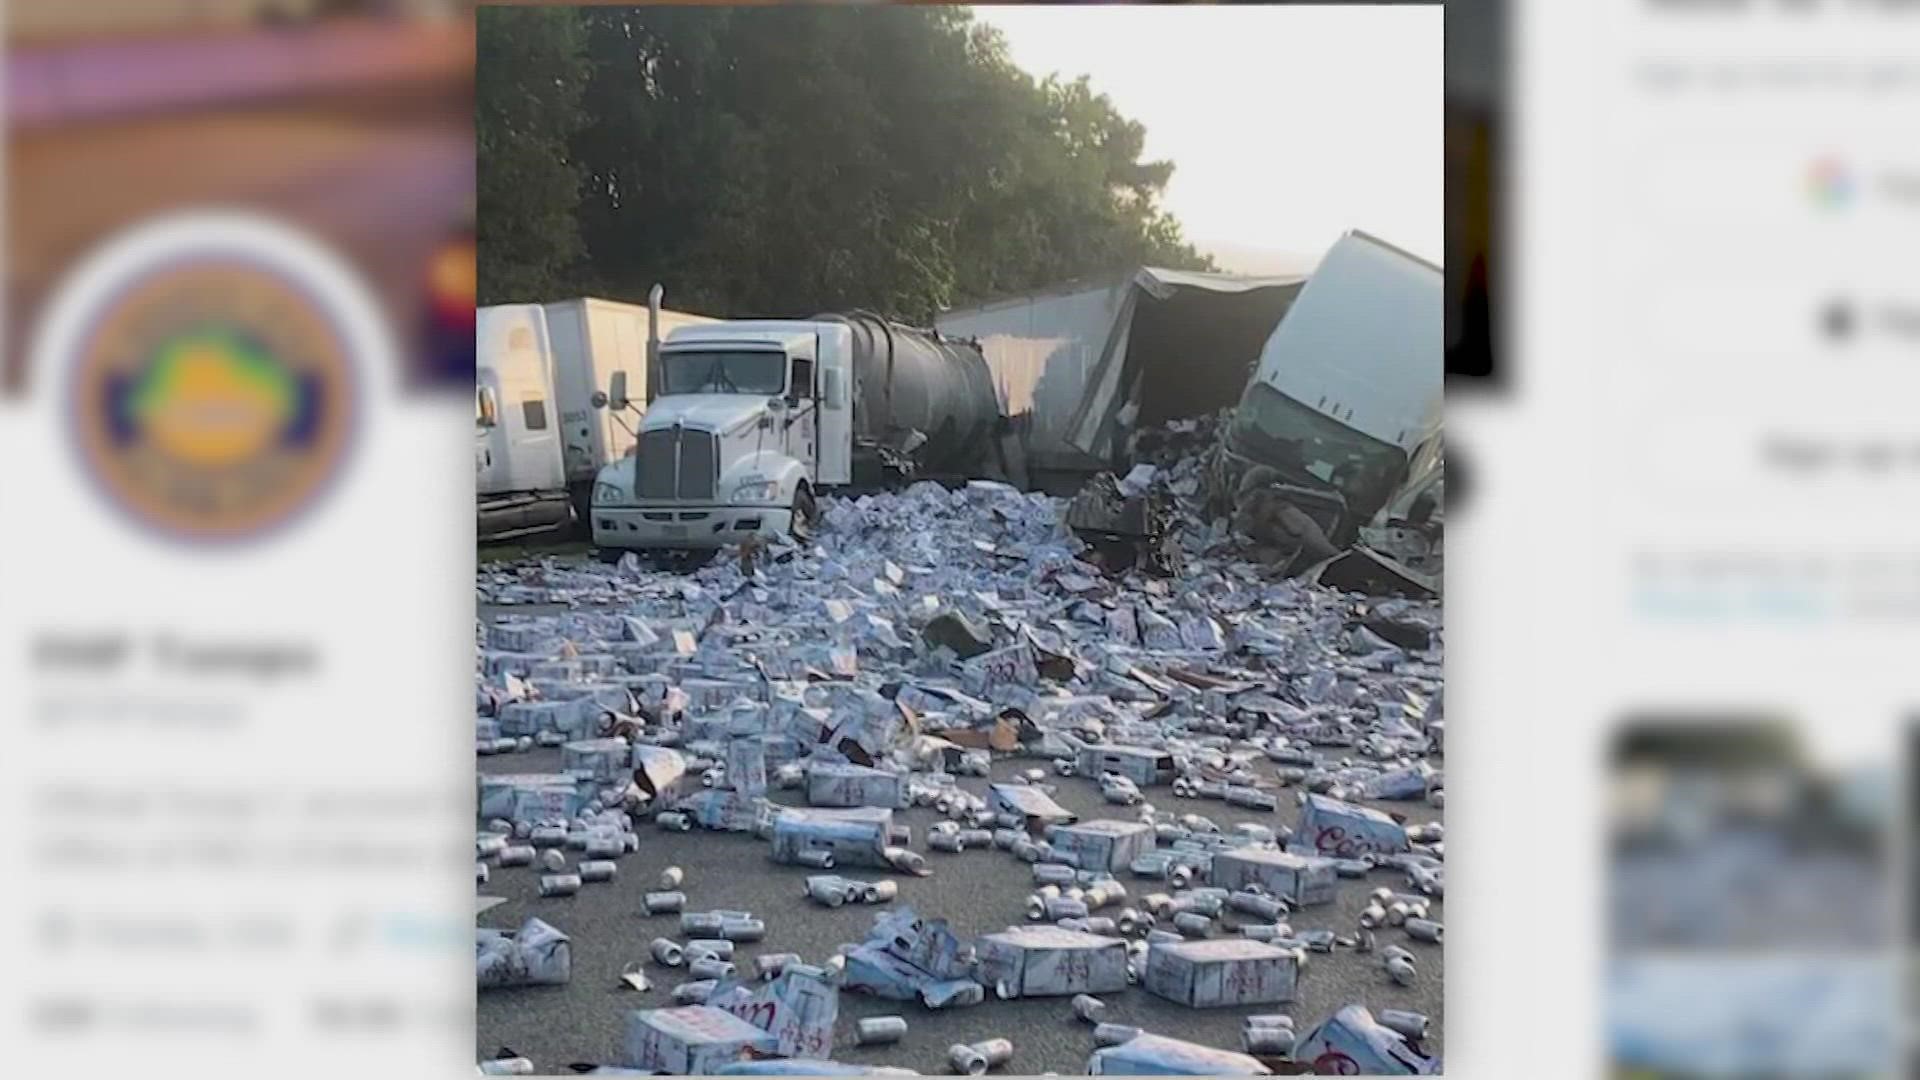 A massive truck crash that included 5 semi-trucks with one carrying a lot of Coors Light. Part of the highway was shut down for clean up.